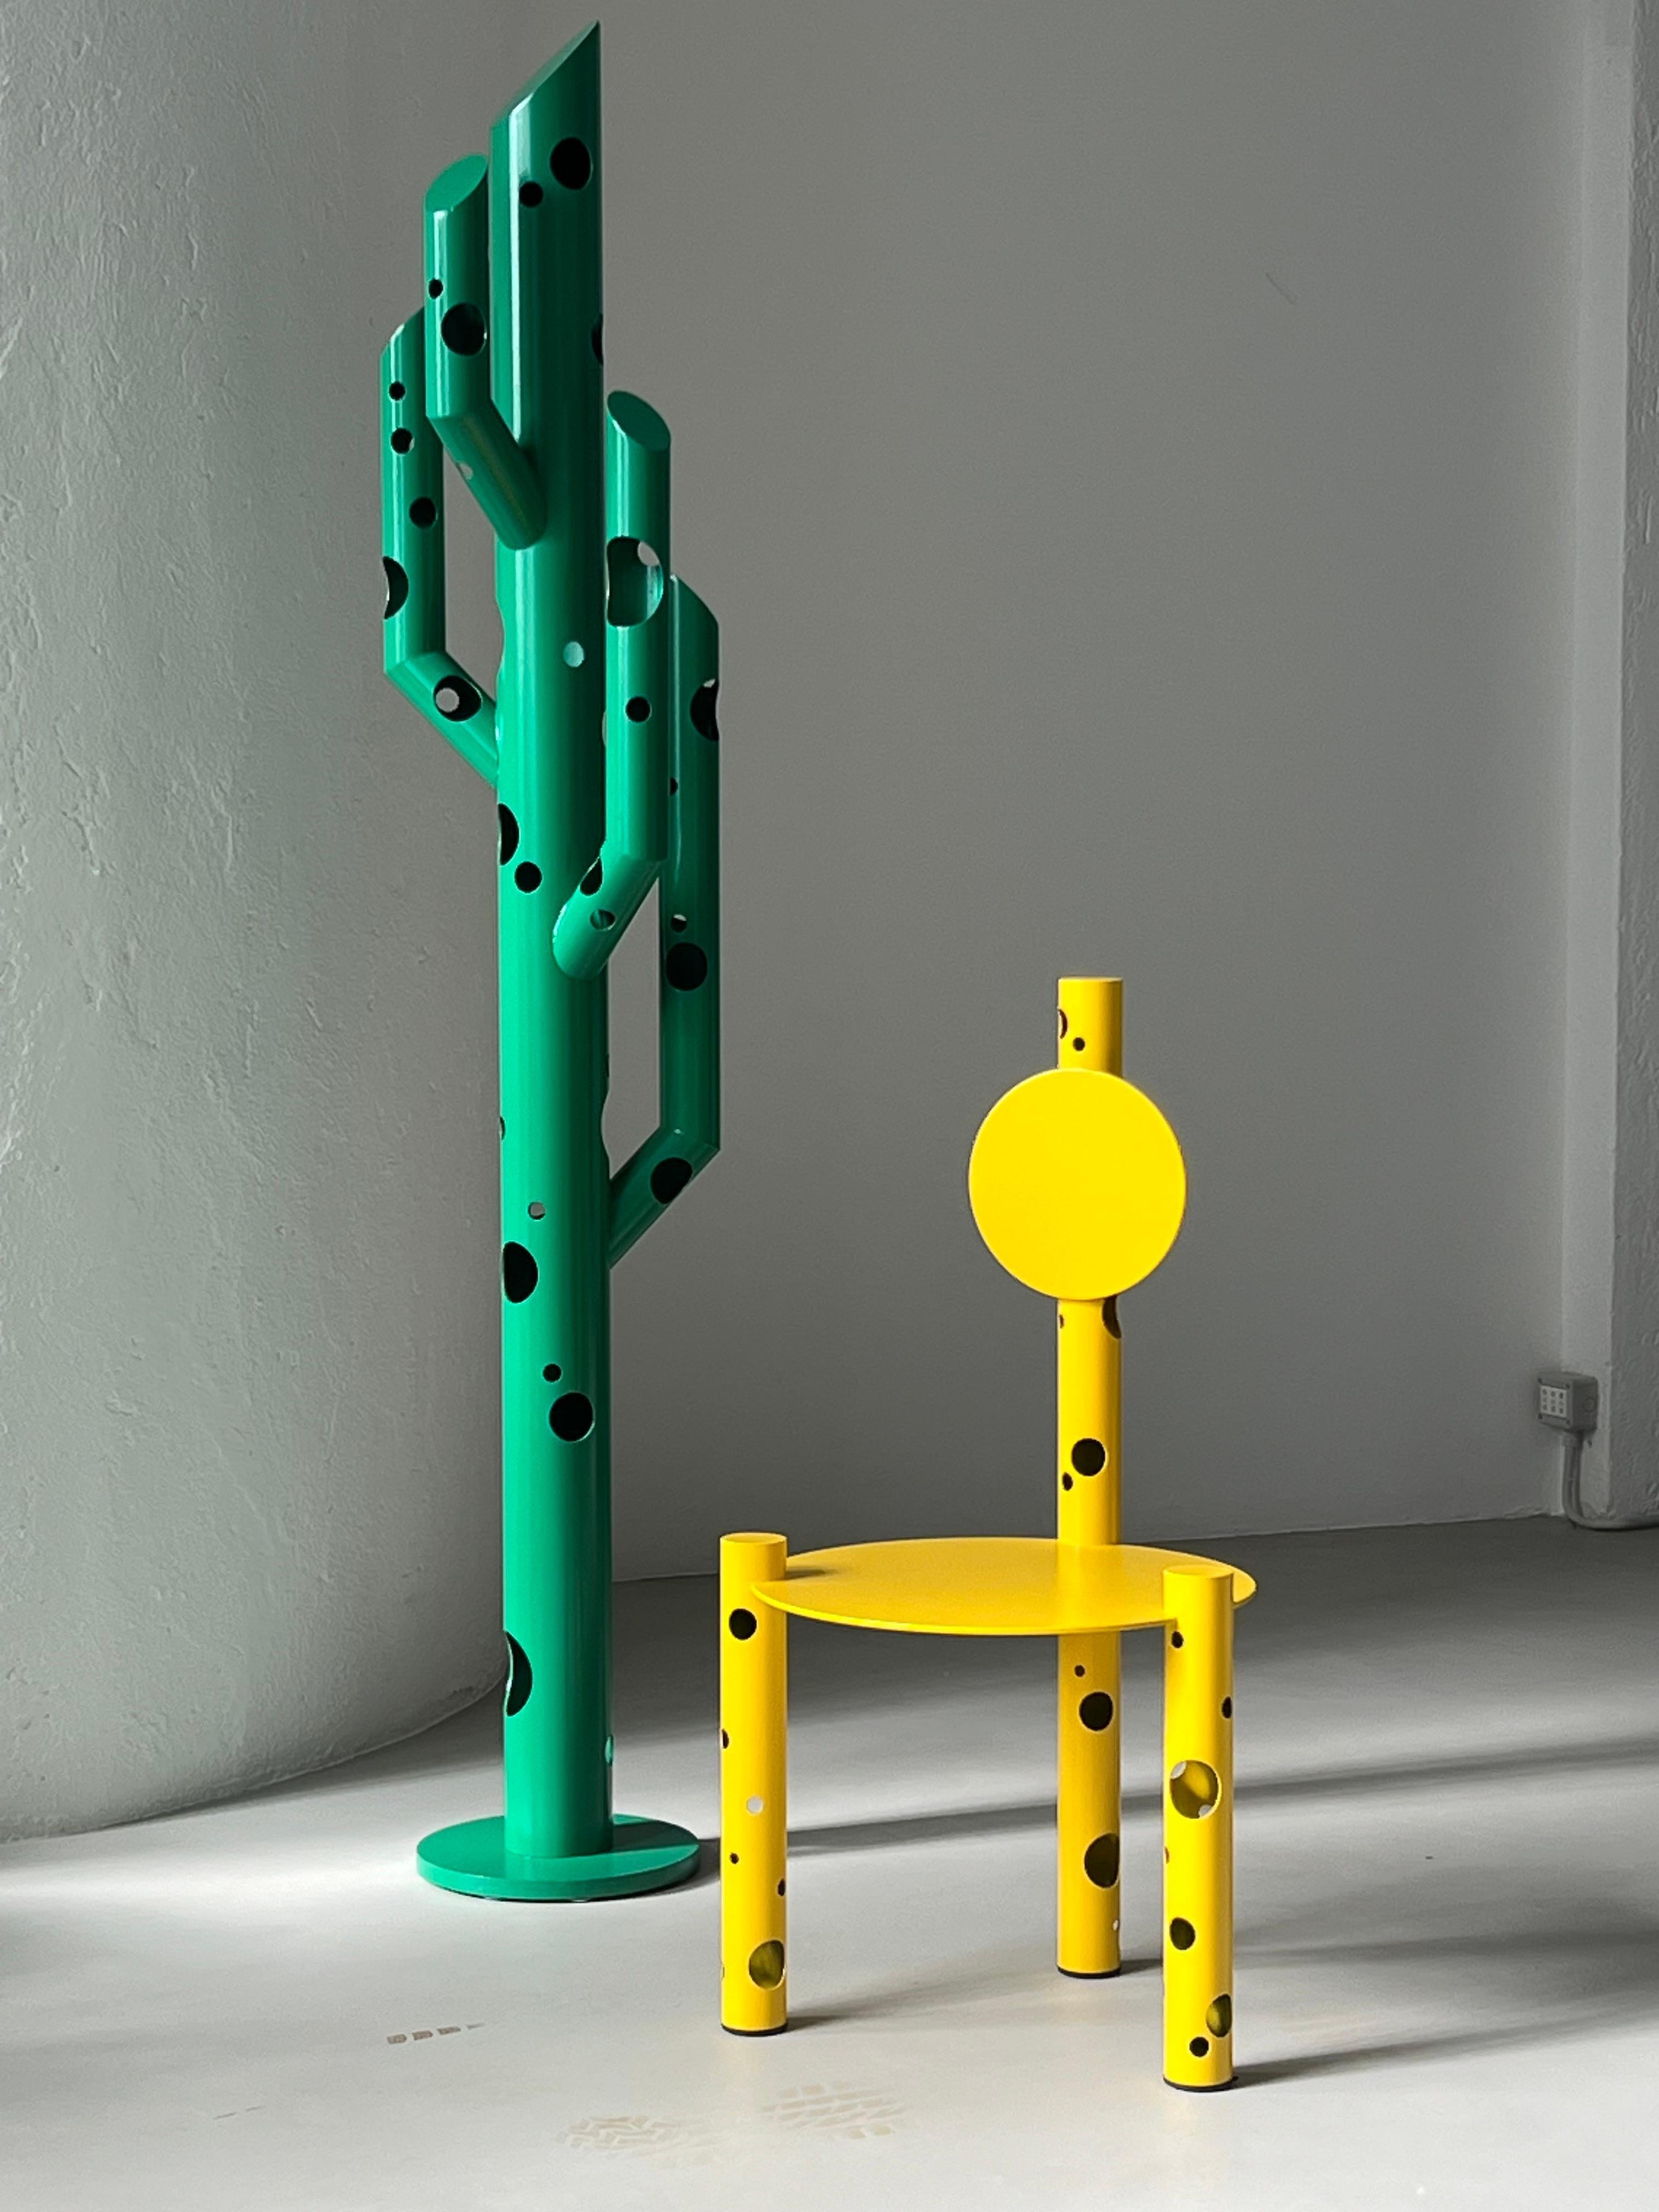 Contemporary Metal Sculpture - Collectible Design - Decorative Coat Hanger

Playful, unexpected and bright is the new Cactus sculpture from our Spinzi collection. Designed and handcrafted on occasion of the 2024 Milano Design Week, it is a bold